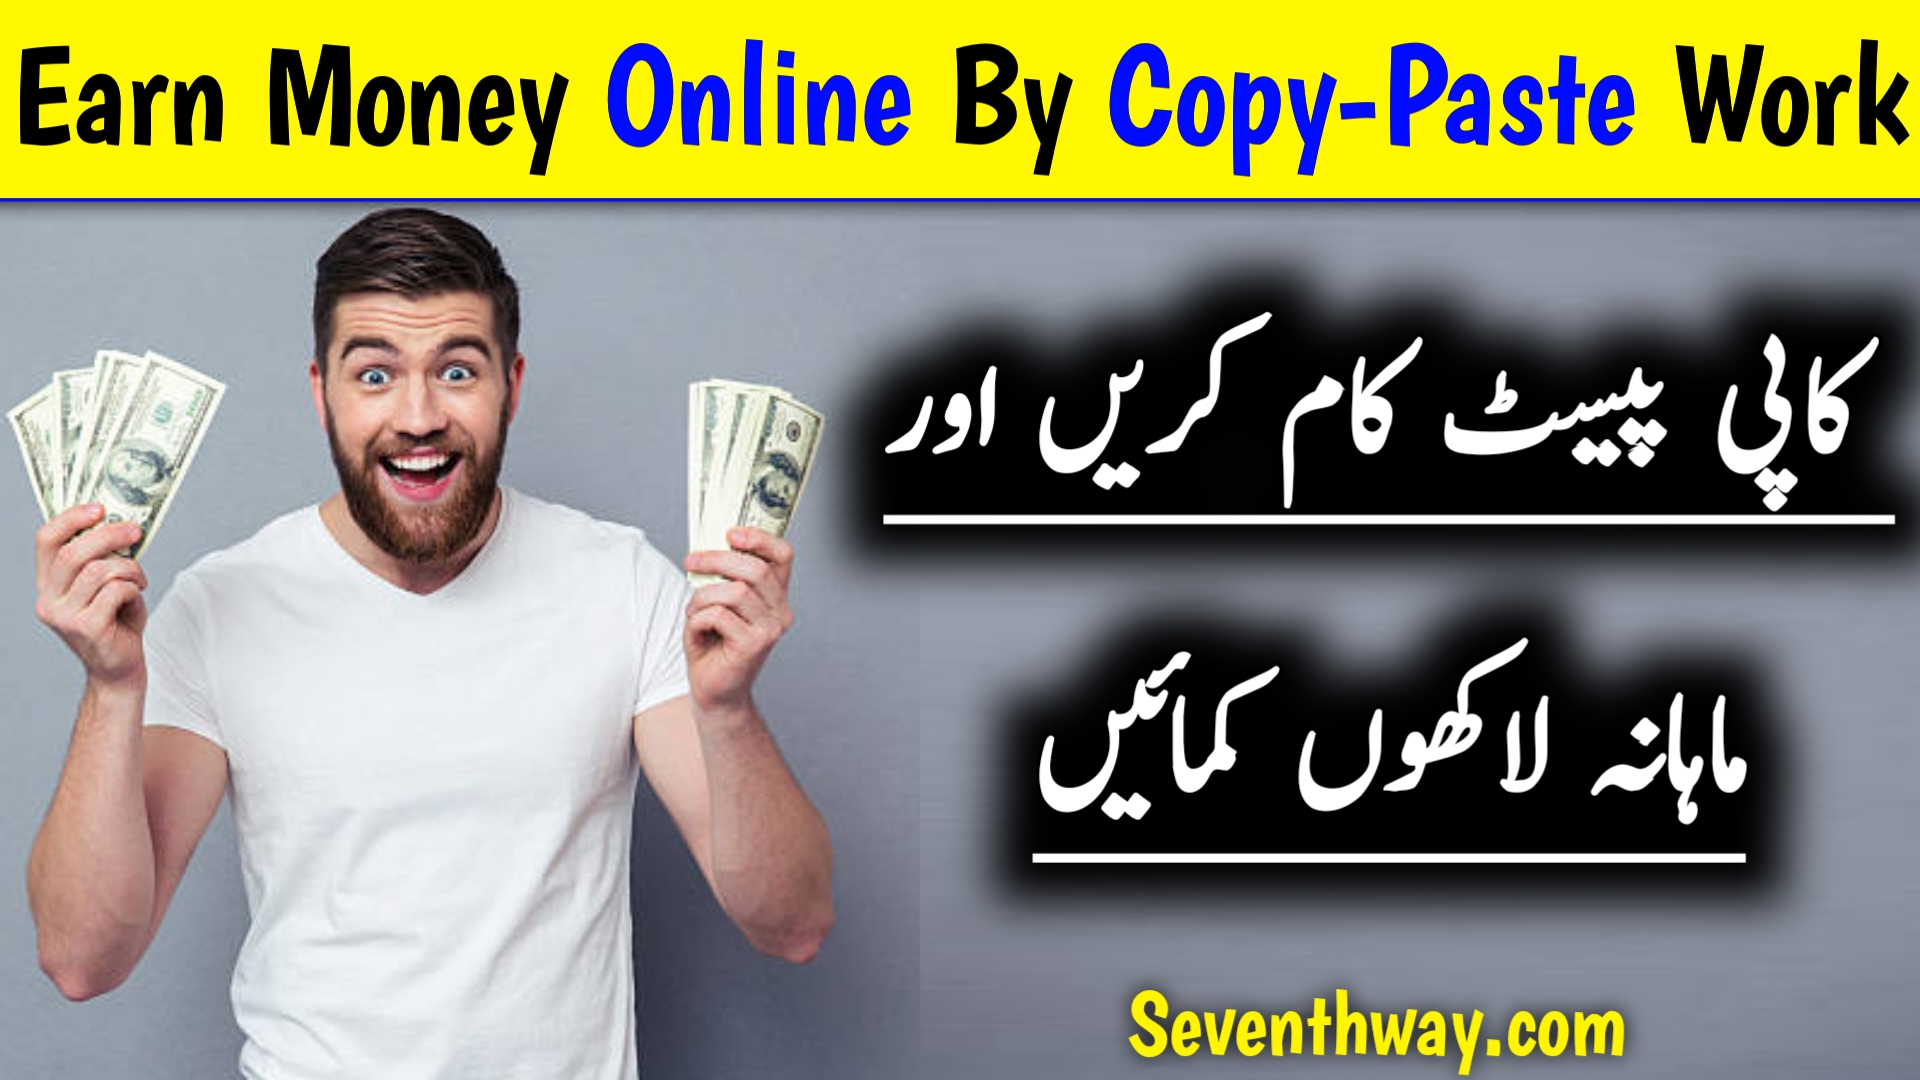 Earn Money Online From Home by Copy Paste